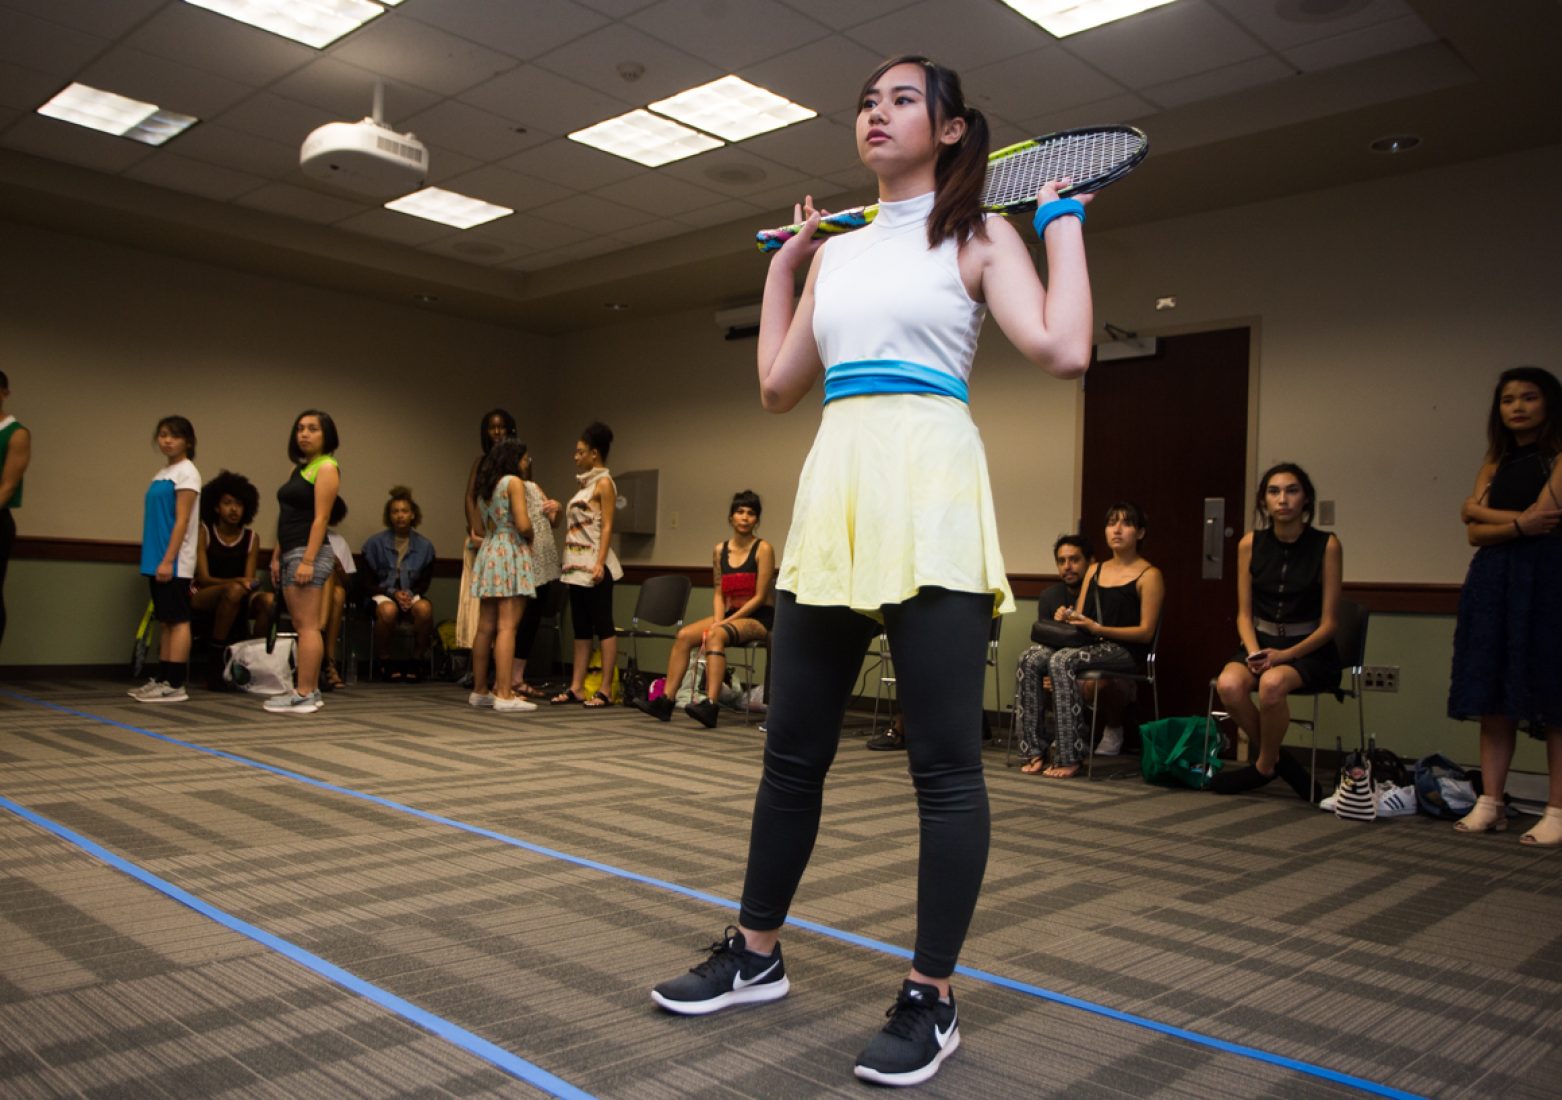 A model practices her runway walk in a Phua Lee design during rehearsal in the University Union Foothill Suite on Wednesday. Many of Lee’s models in her ‘Take the Hint’ collection carry tennis racquets on the catwalk. (Photo by Nicole Fowler)